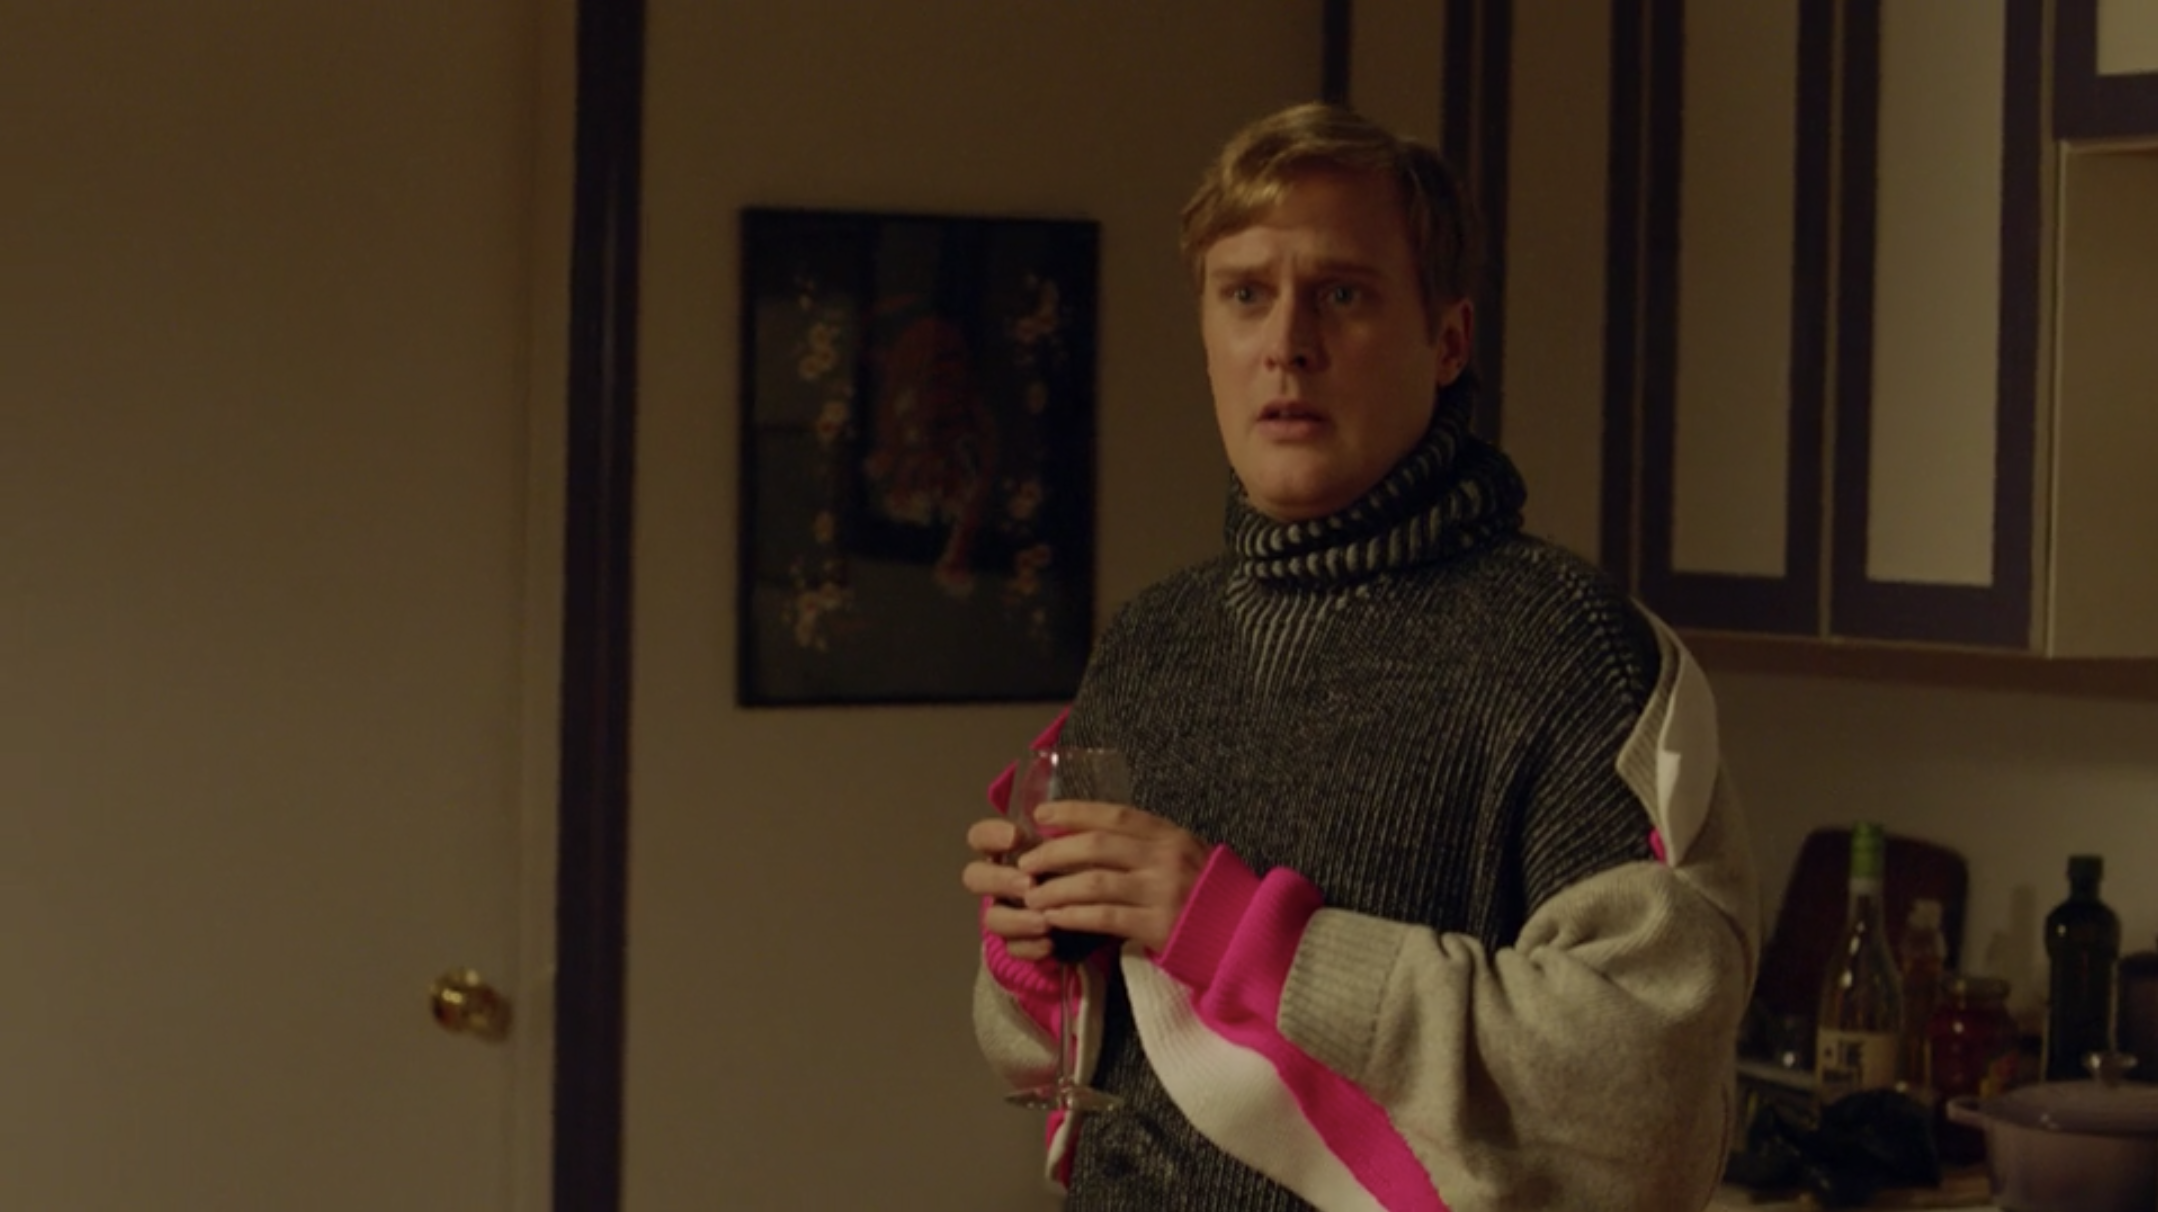 John Early holding a glass of wine.